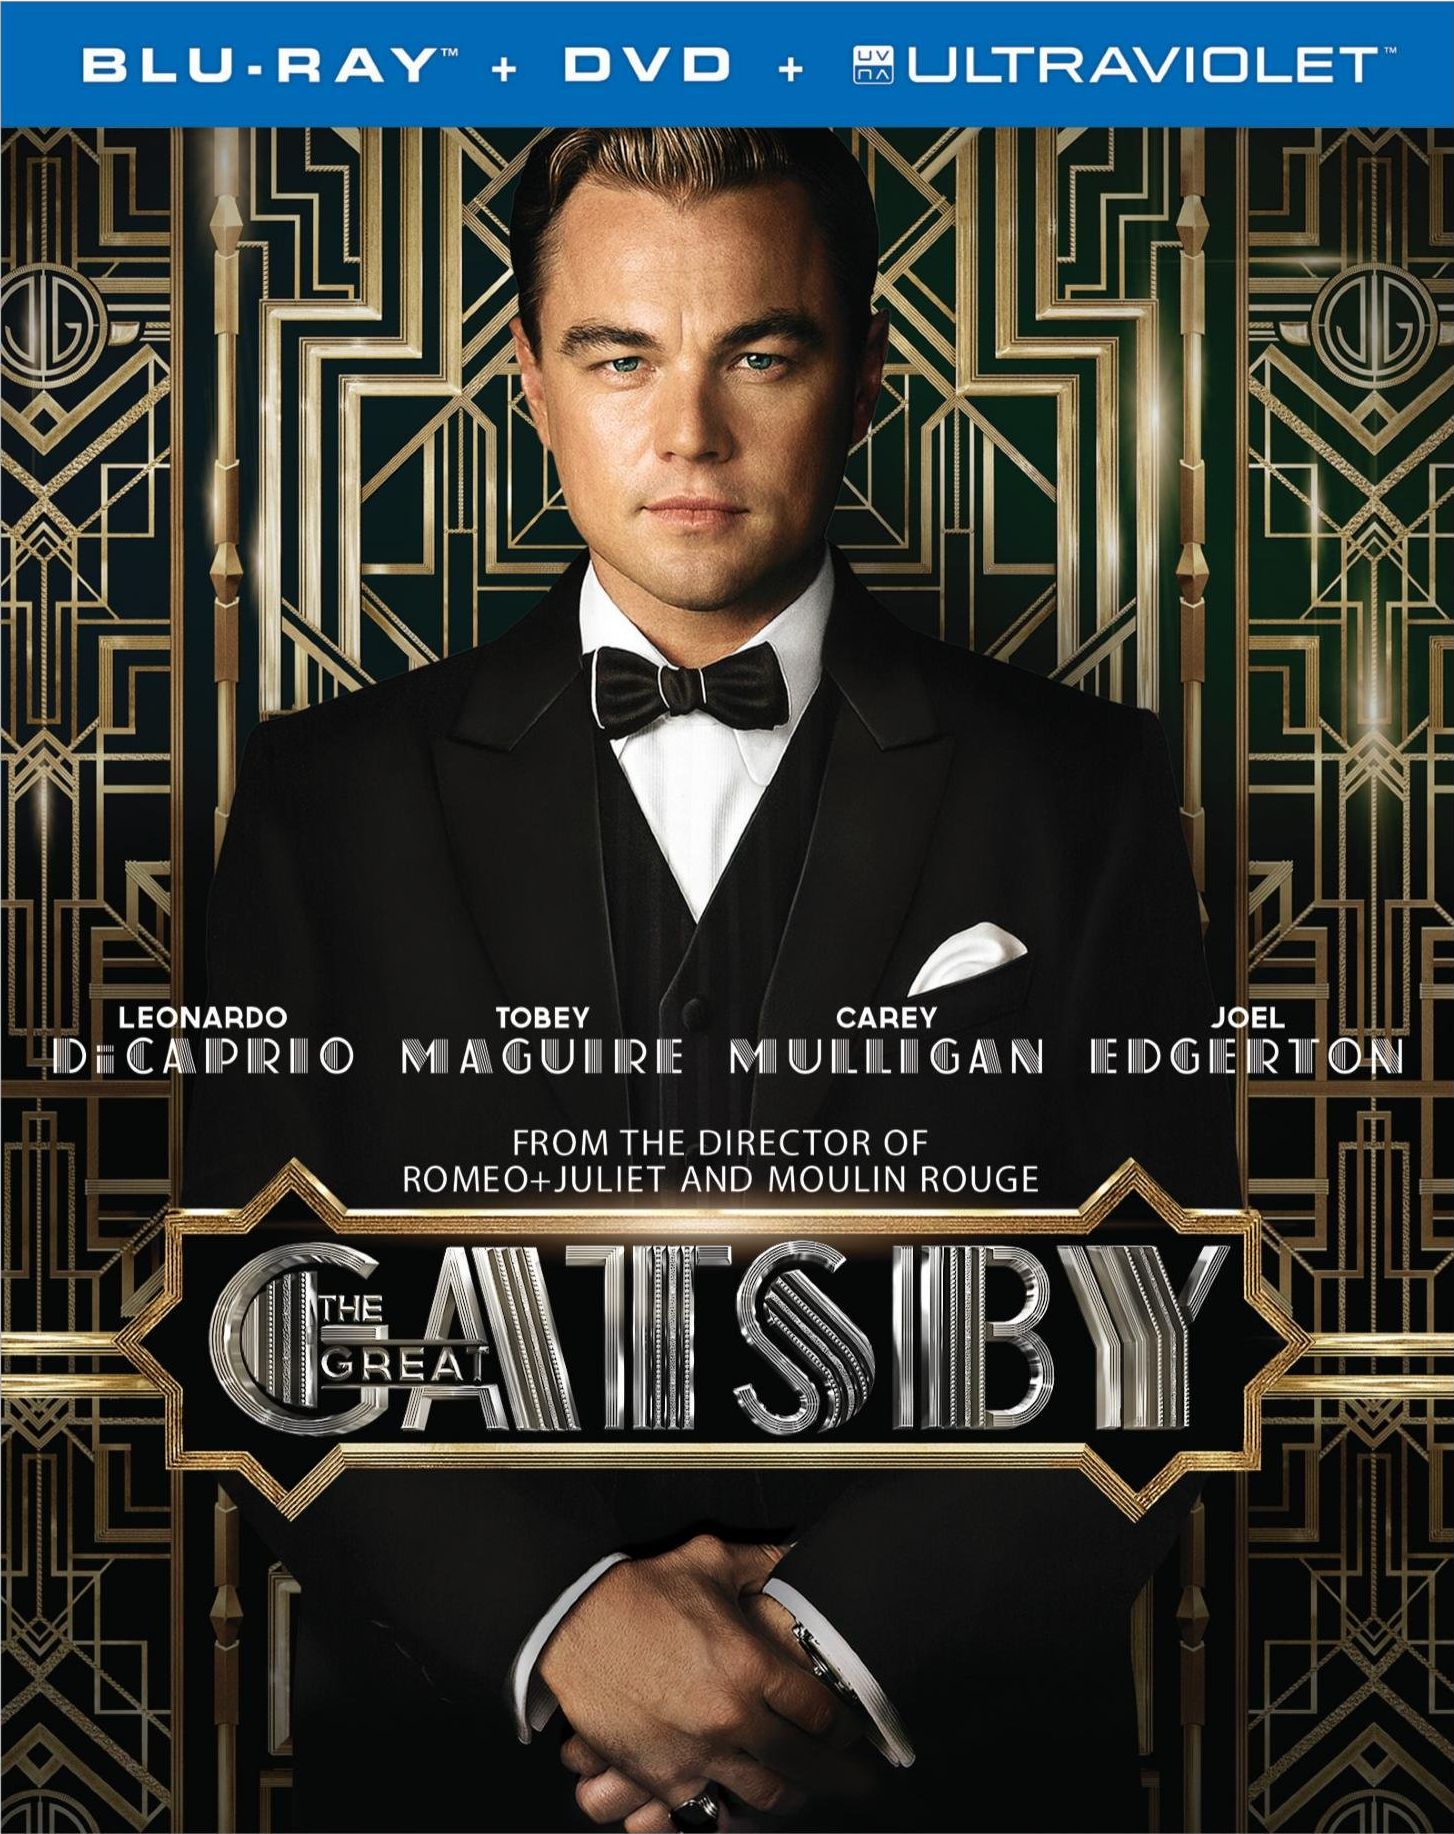 The Great Gatsby DVD Release Date August 27, 2013